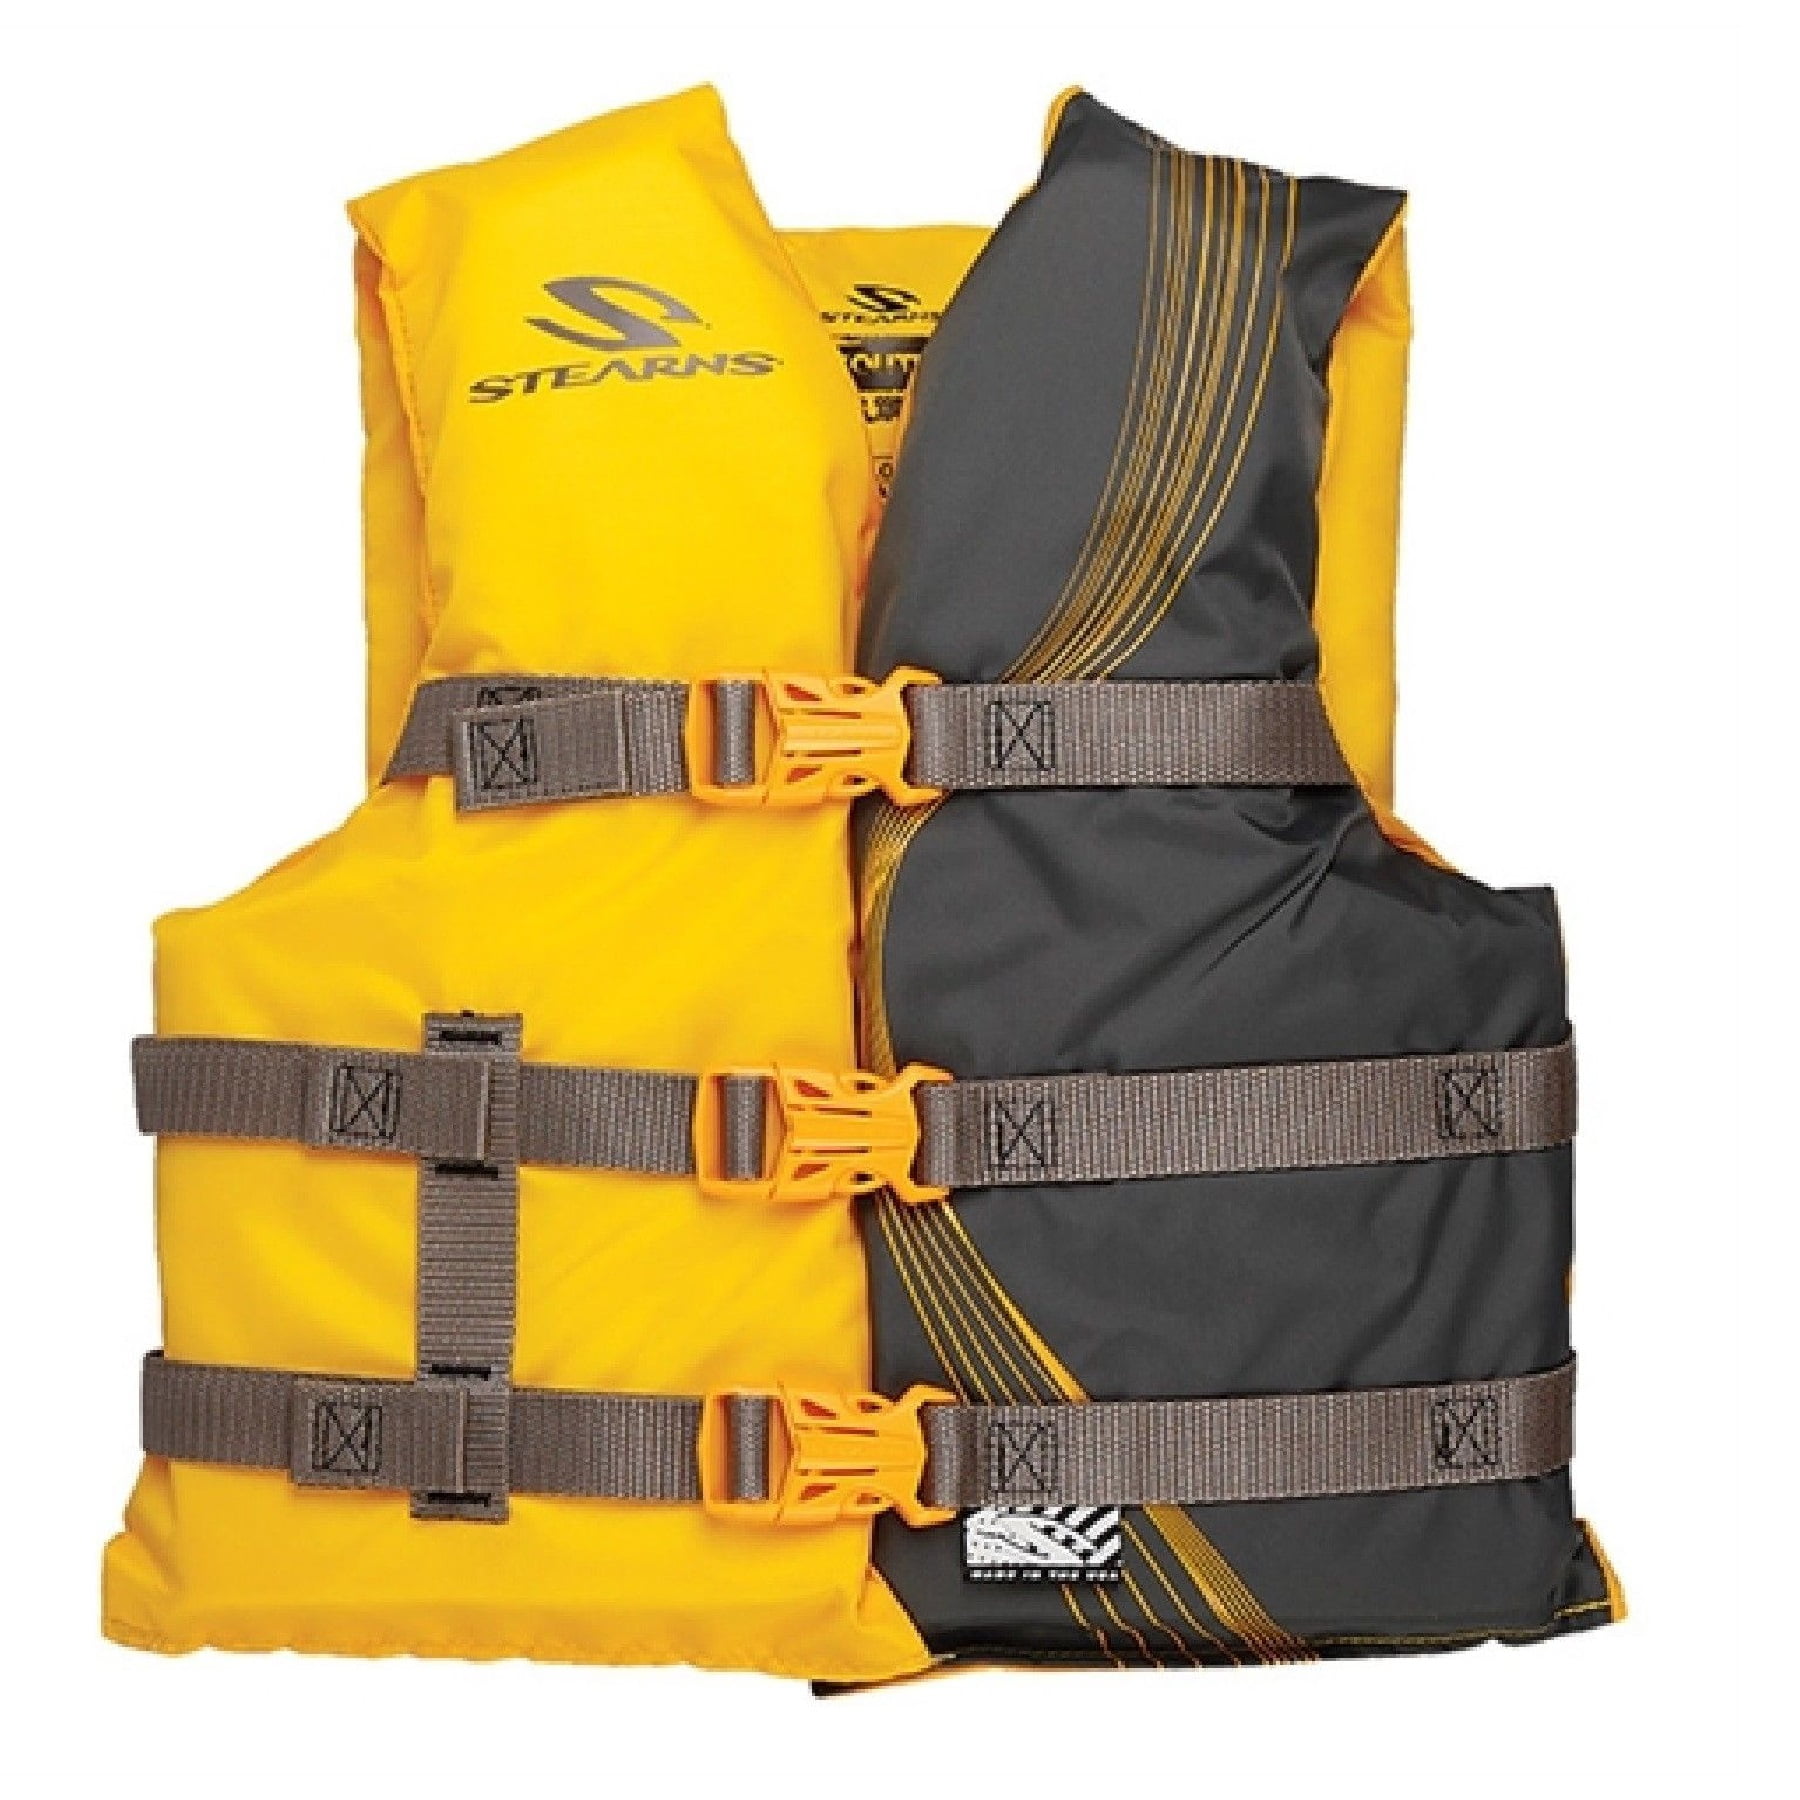 COLEMAN Stearns Classic Series Youth Red Life Jacket Flotation Vest 50-90 lbs for sale online 